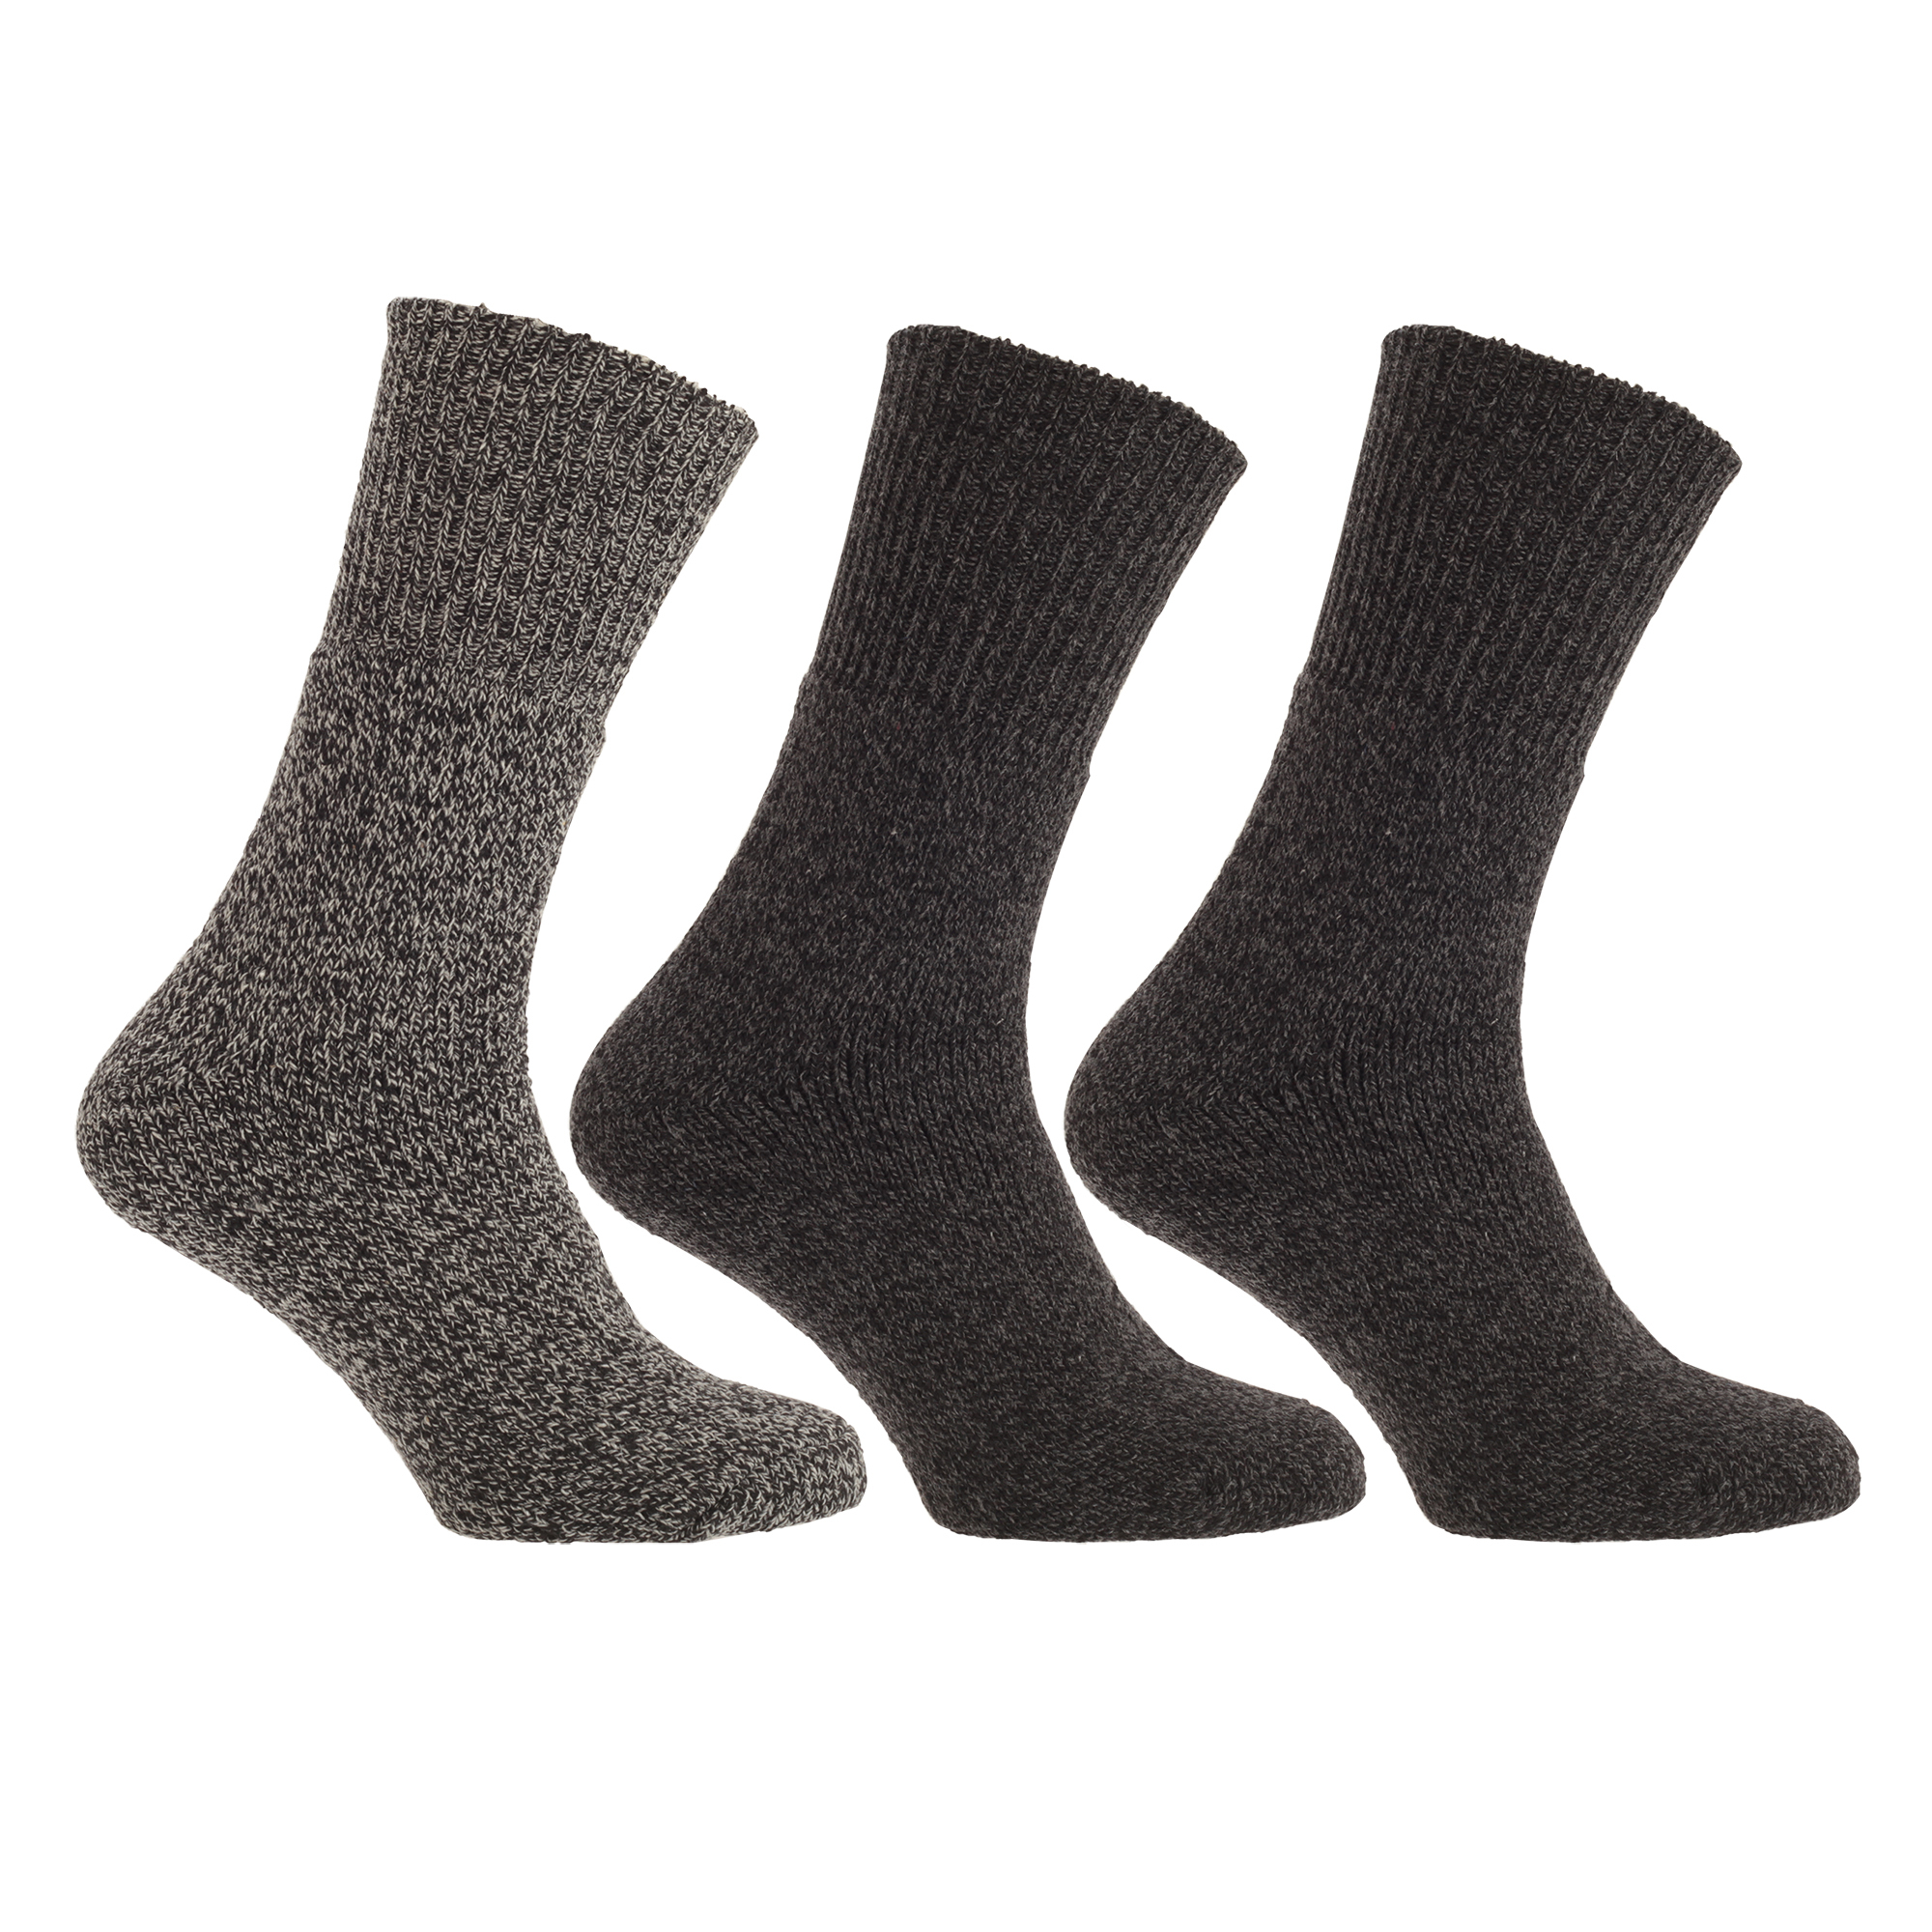 Calcetines Nieve Mujer Universal Textiles